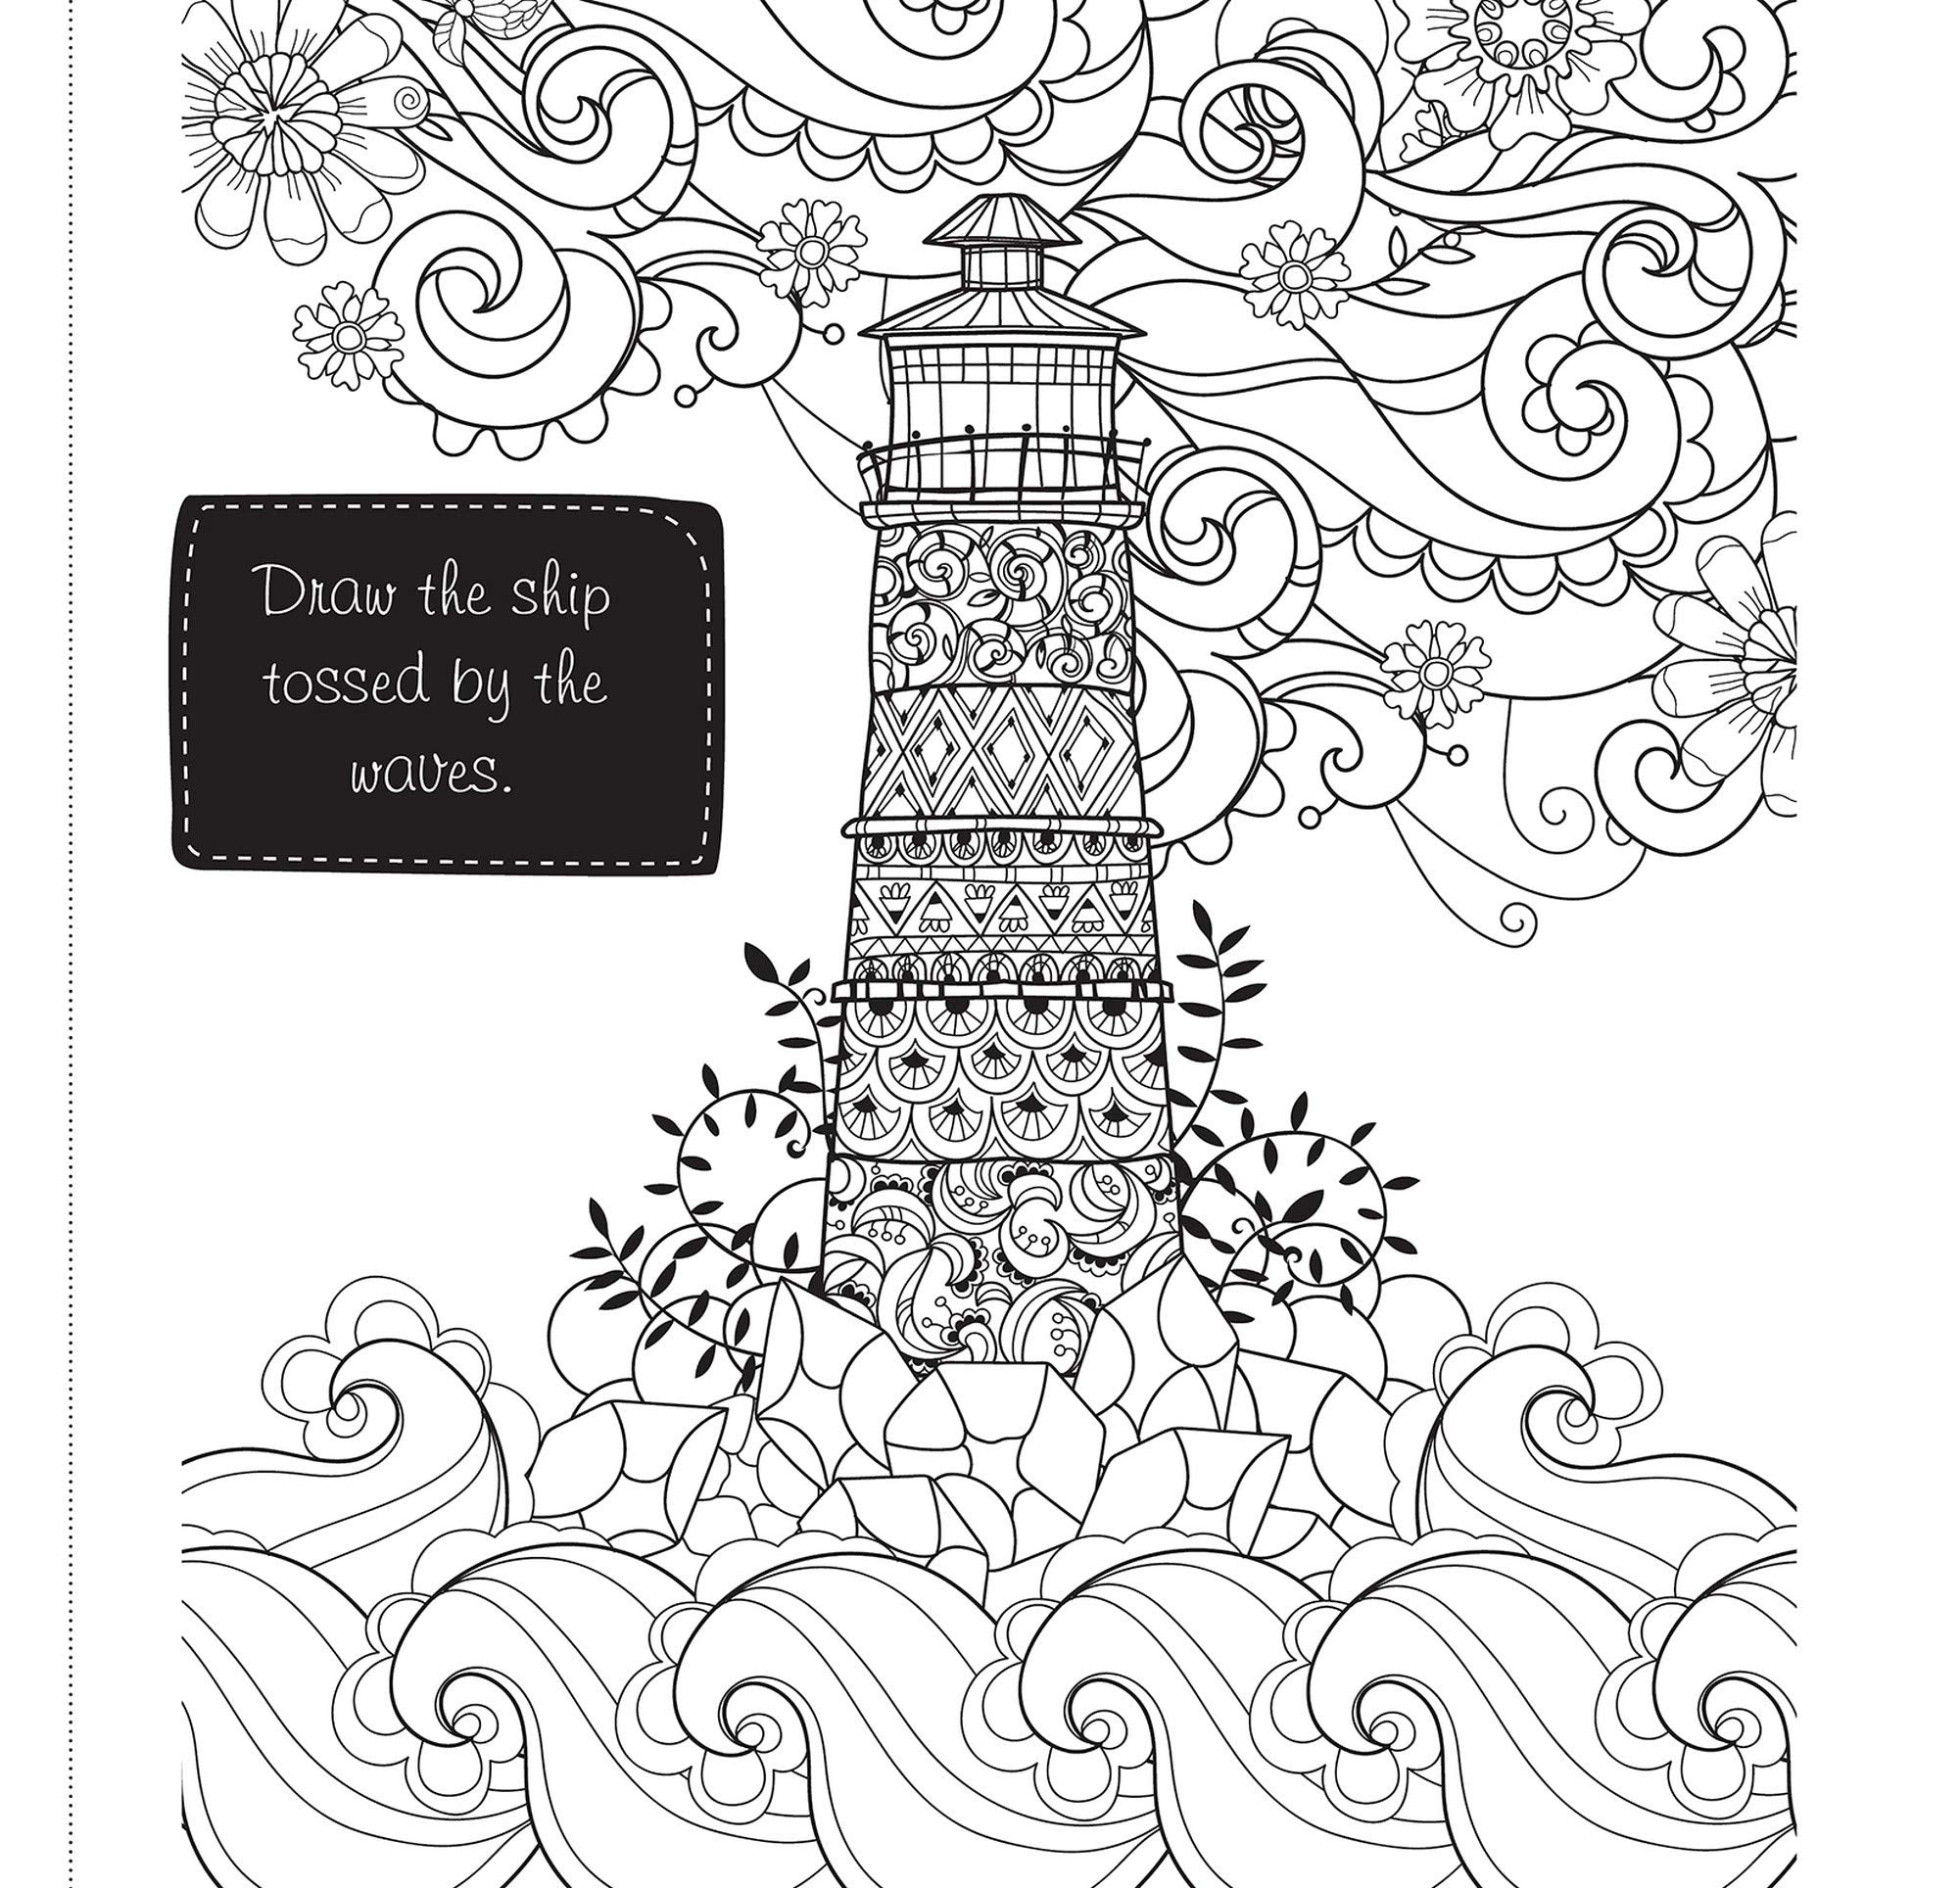 Coloring Activity Book For Kids & Adults